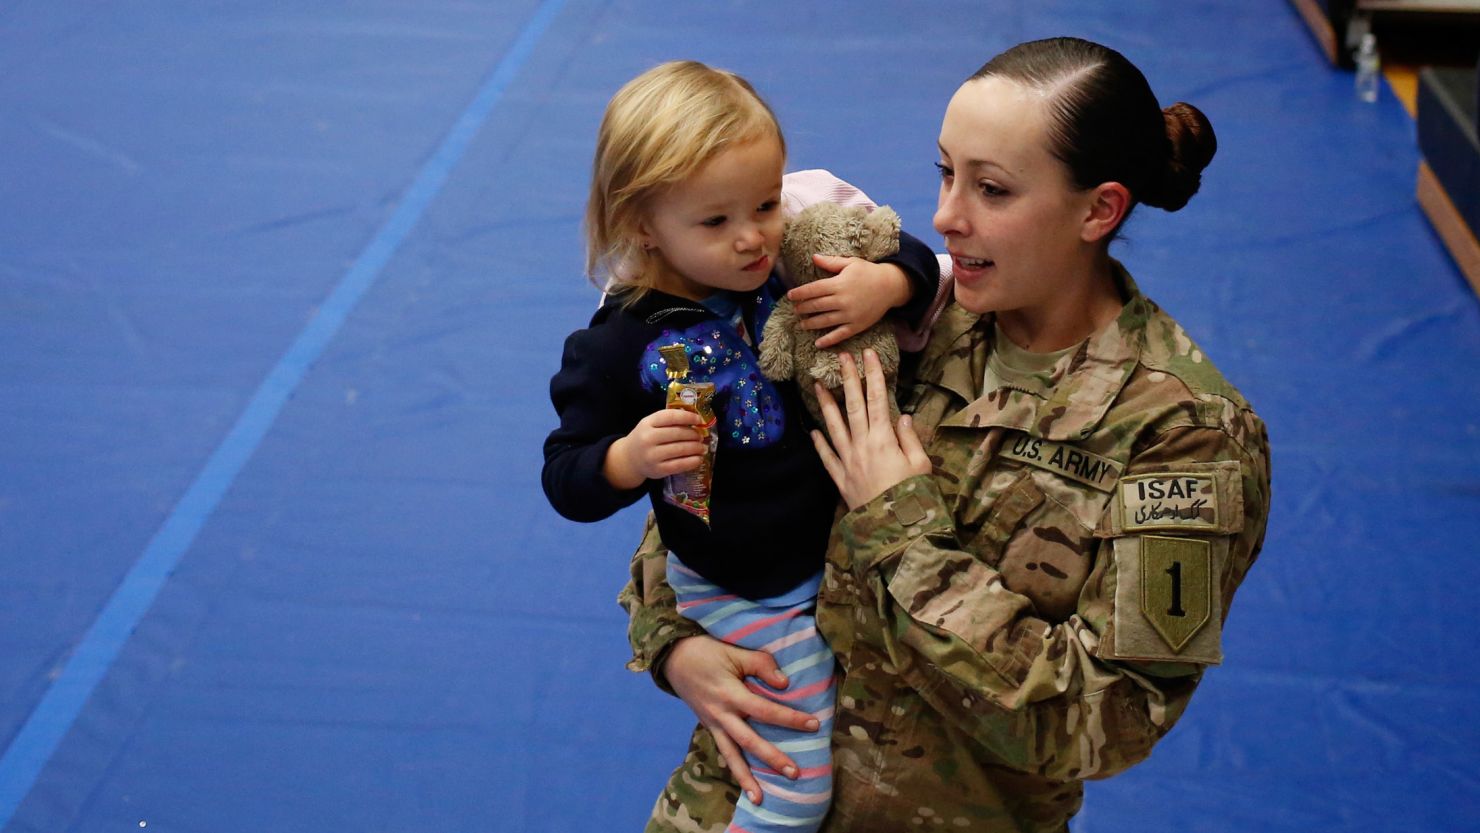 U.S. Army Sgt. Michelle Porter holds her daughter after a homecoming ceremony in Fort Knox, Kentucky, in November 2013. 
